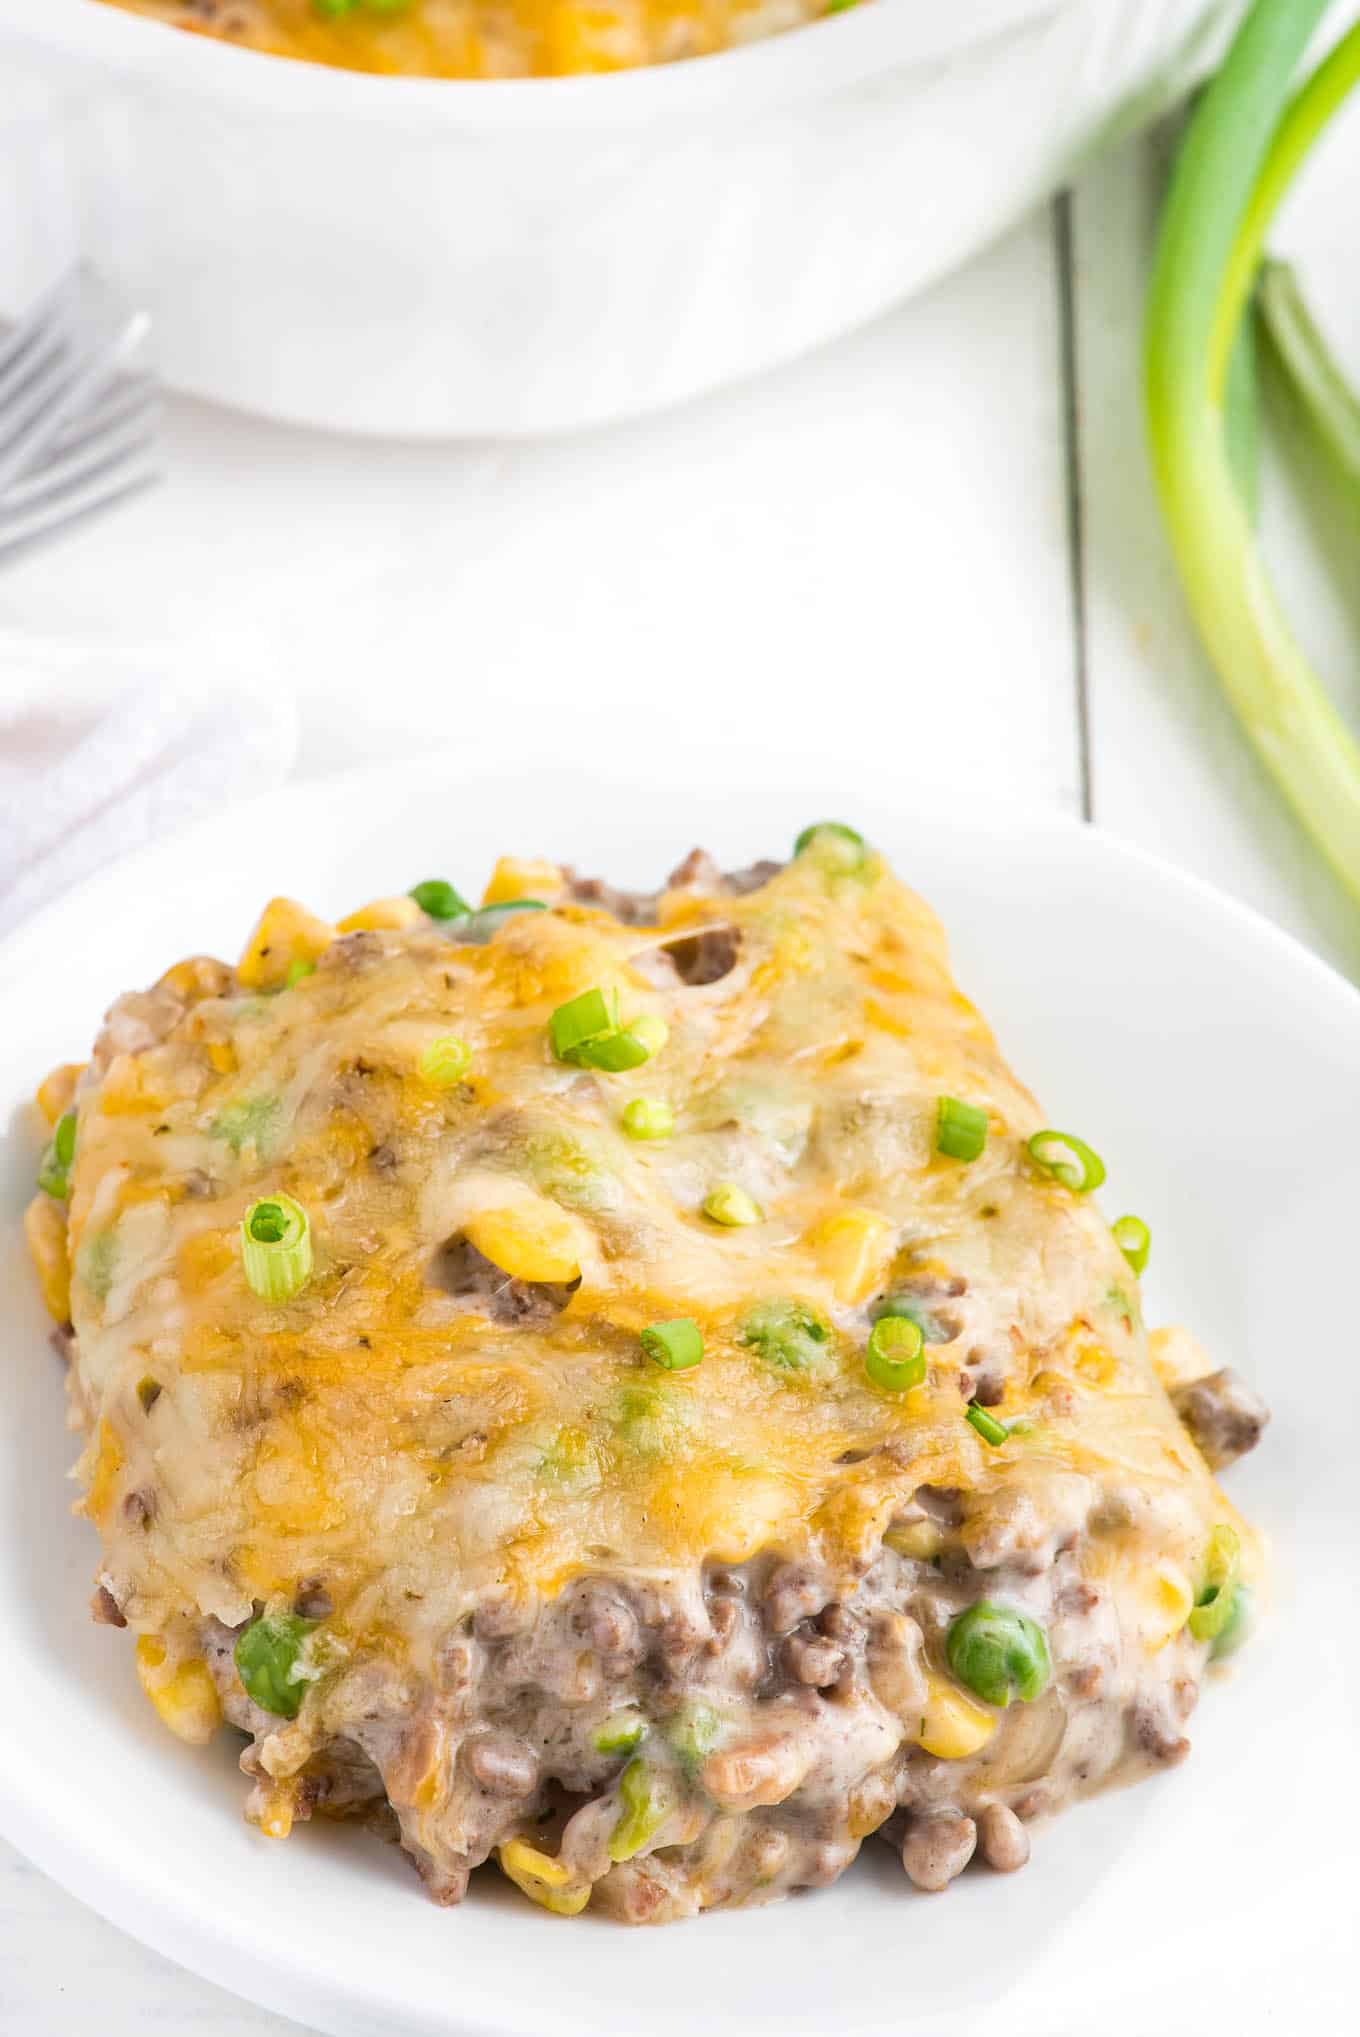 A bowl of ground beef hash brown casserole served up on a plate.